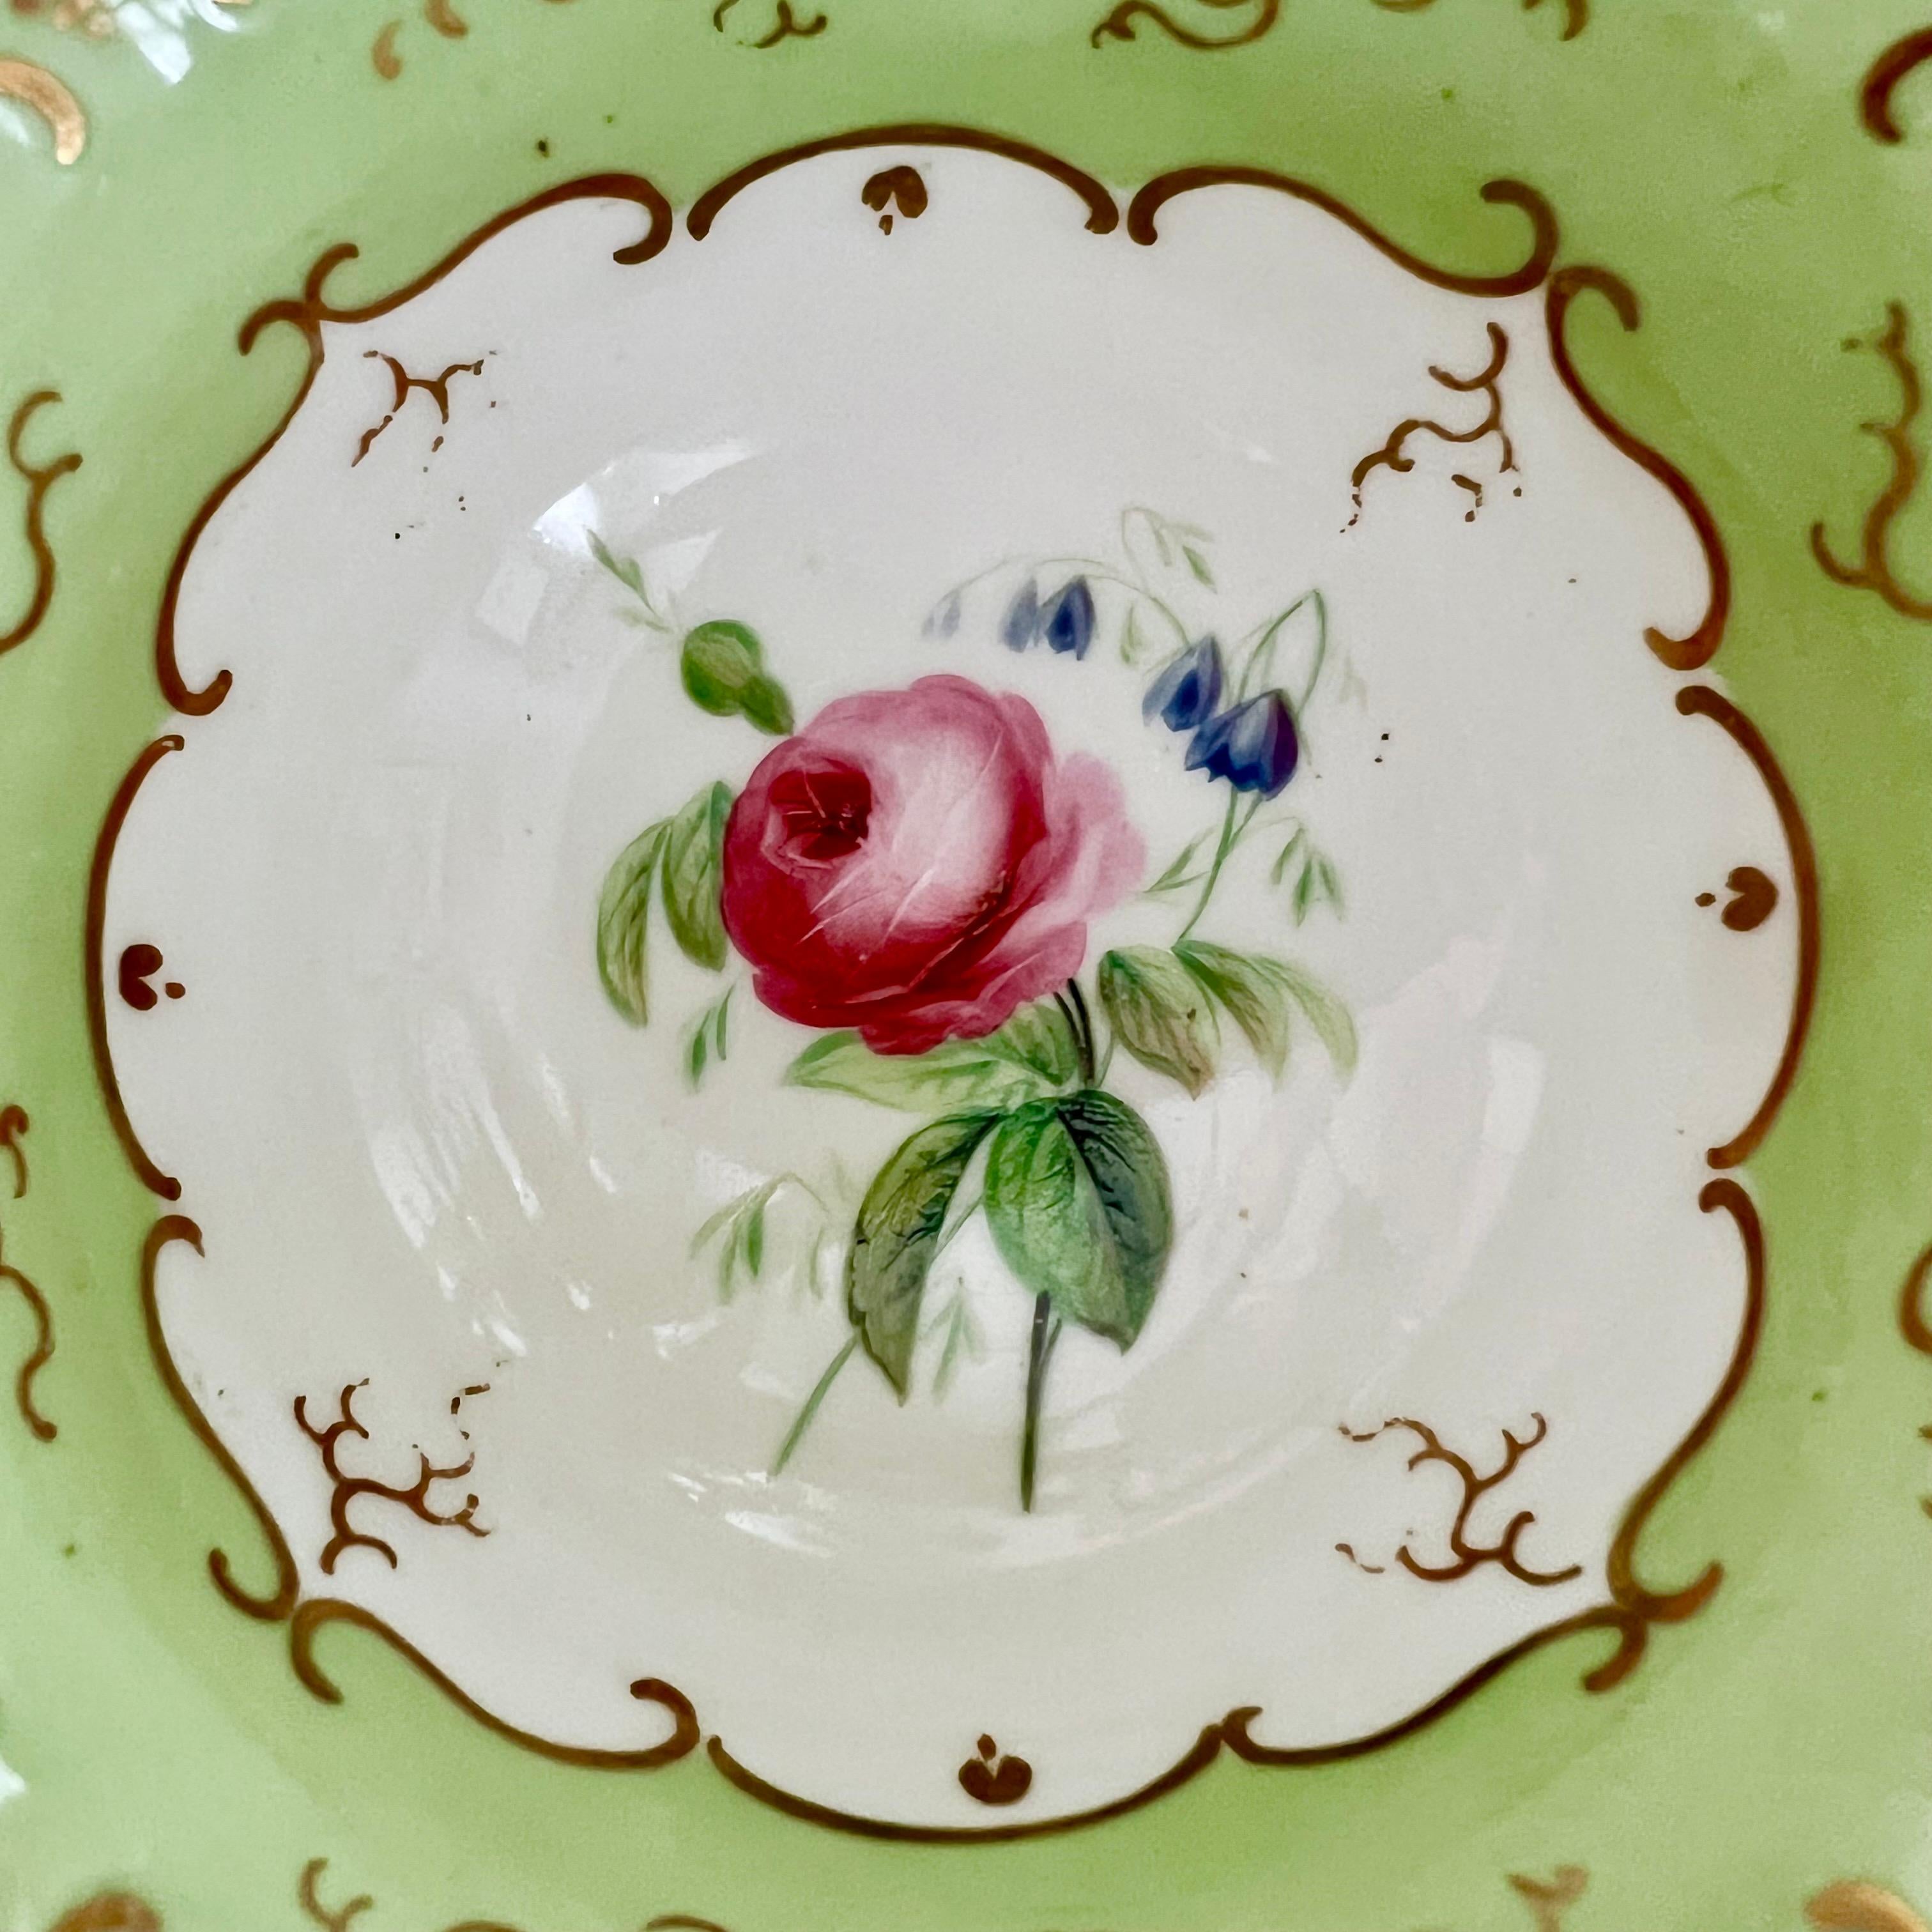 Mid-19th Century H & R Daniel Porcelain Teacup, Apple Green with Pink Roses, Rococo Revival C1840